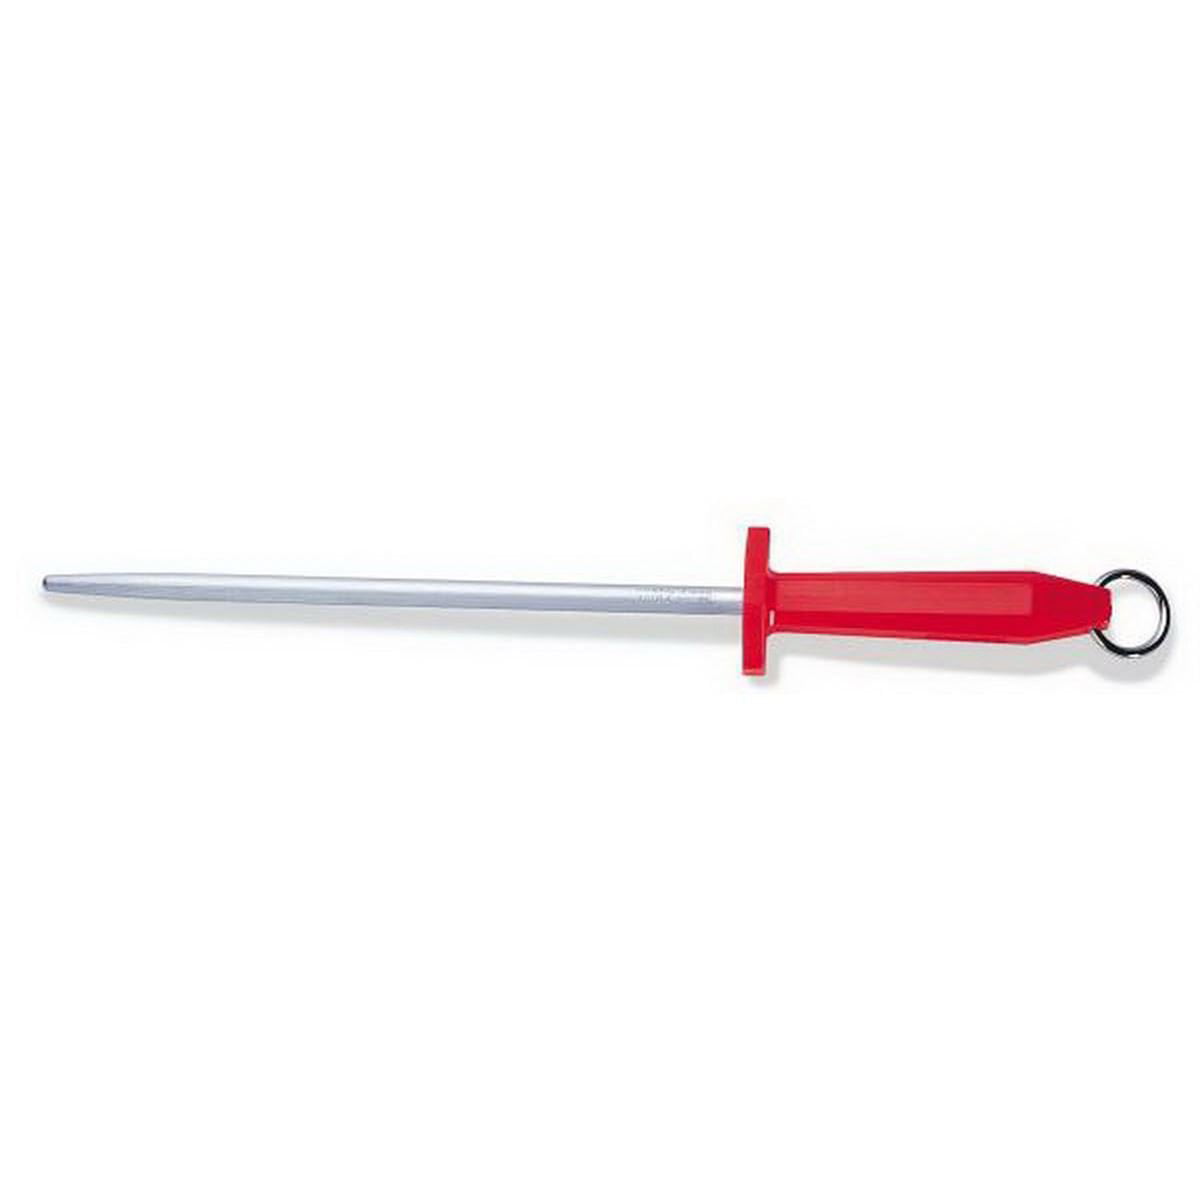 Bubba Blade BB1-ST-BP Red 10" High Carbon Steel Sharpening Rod 